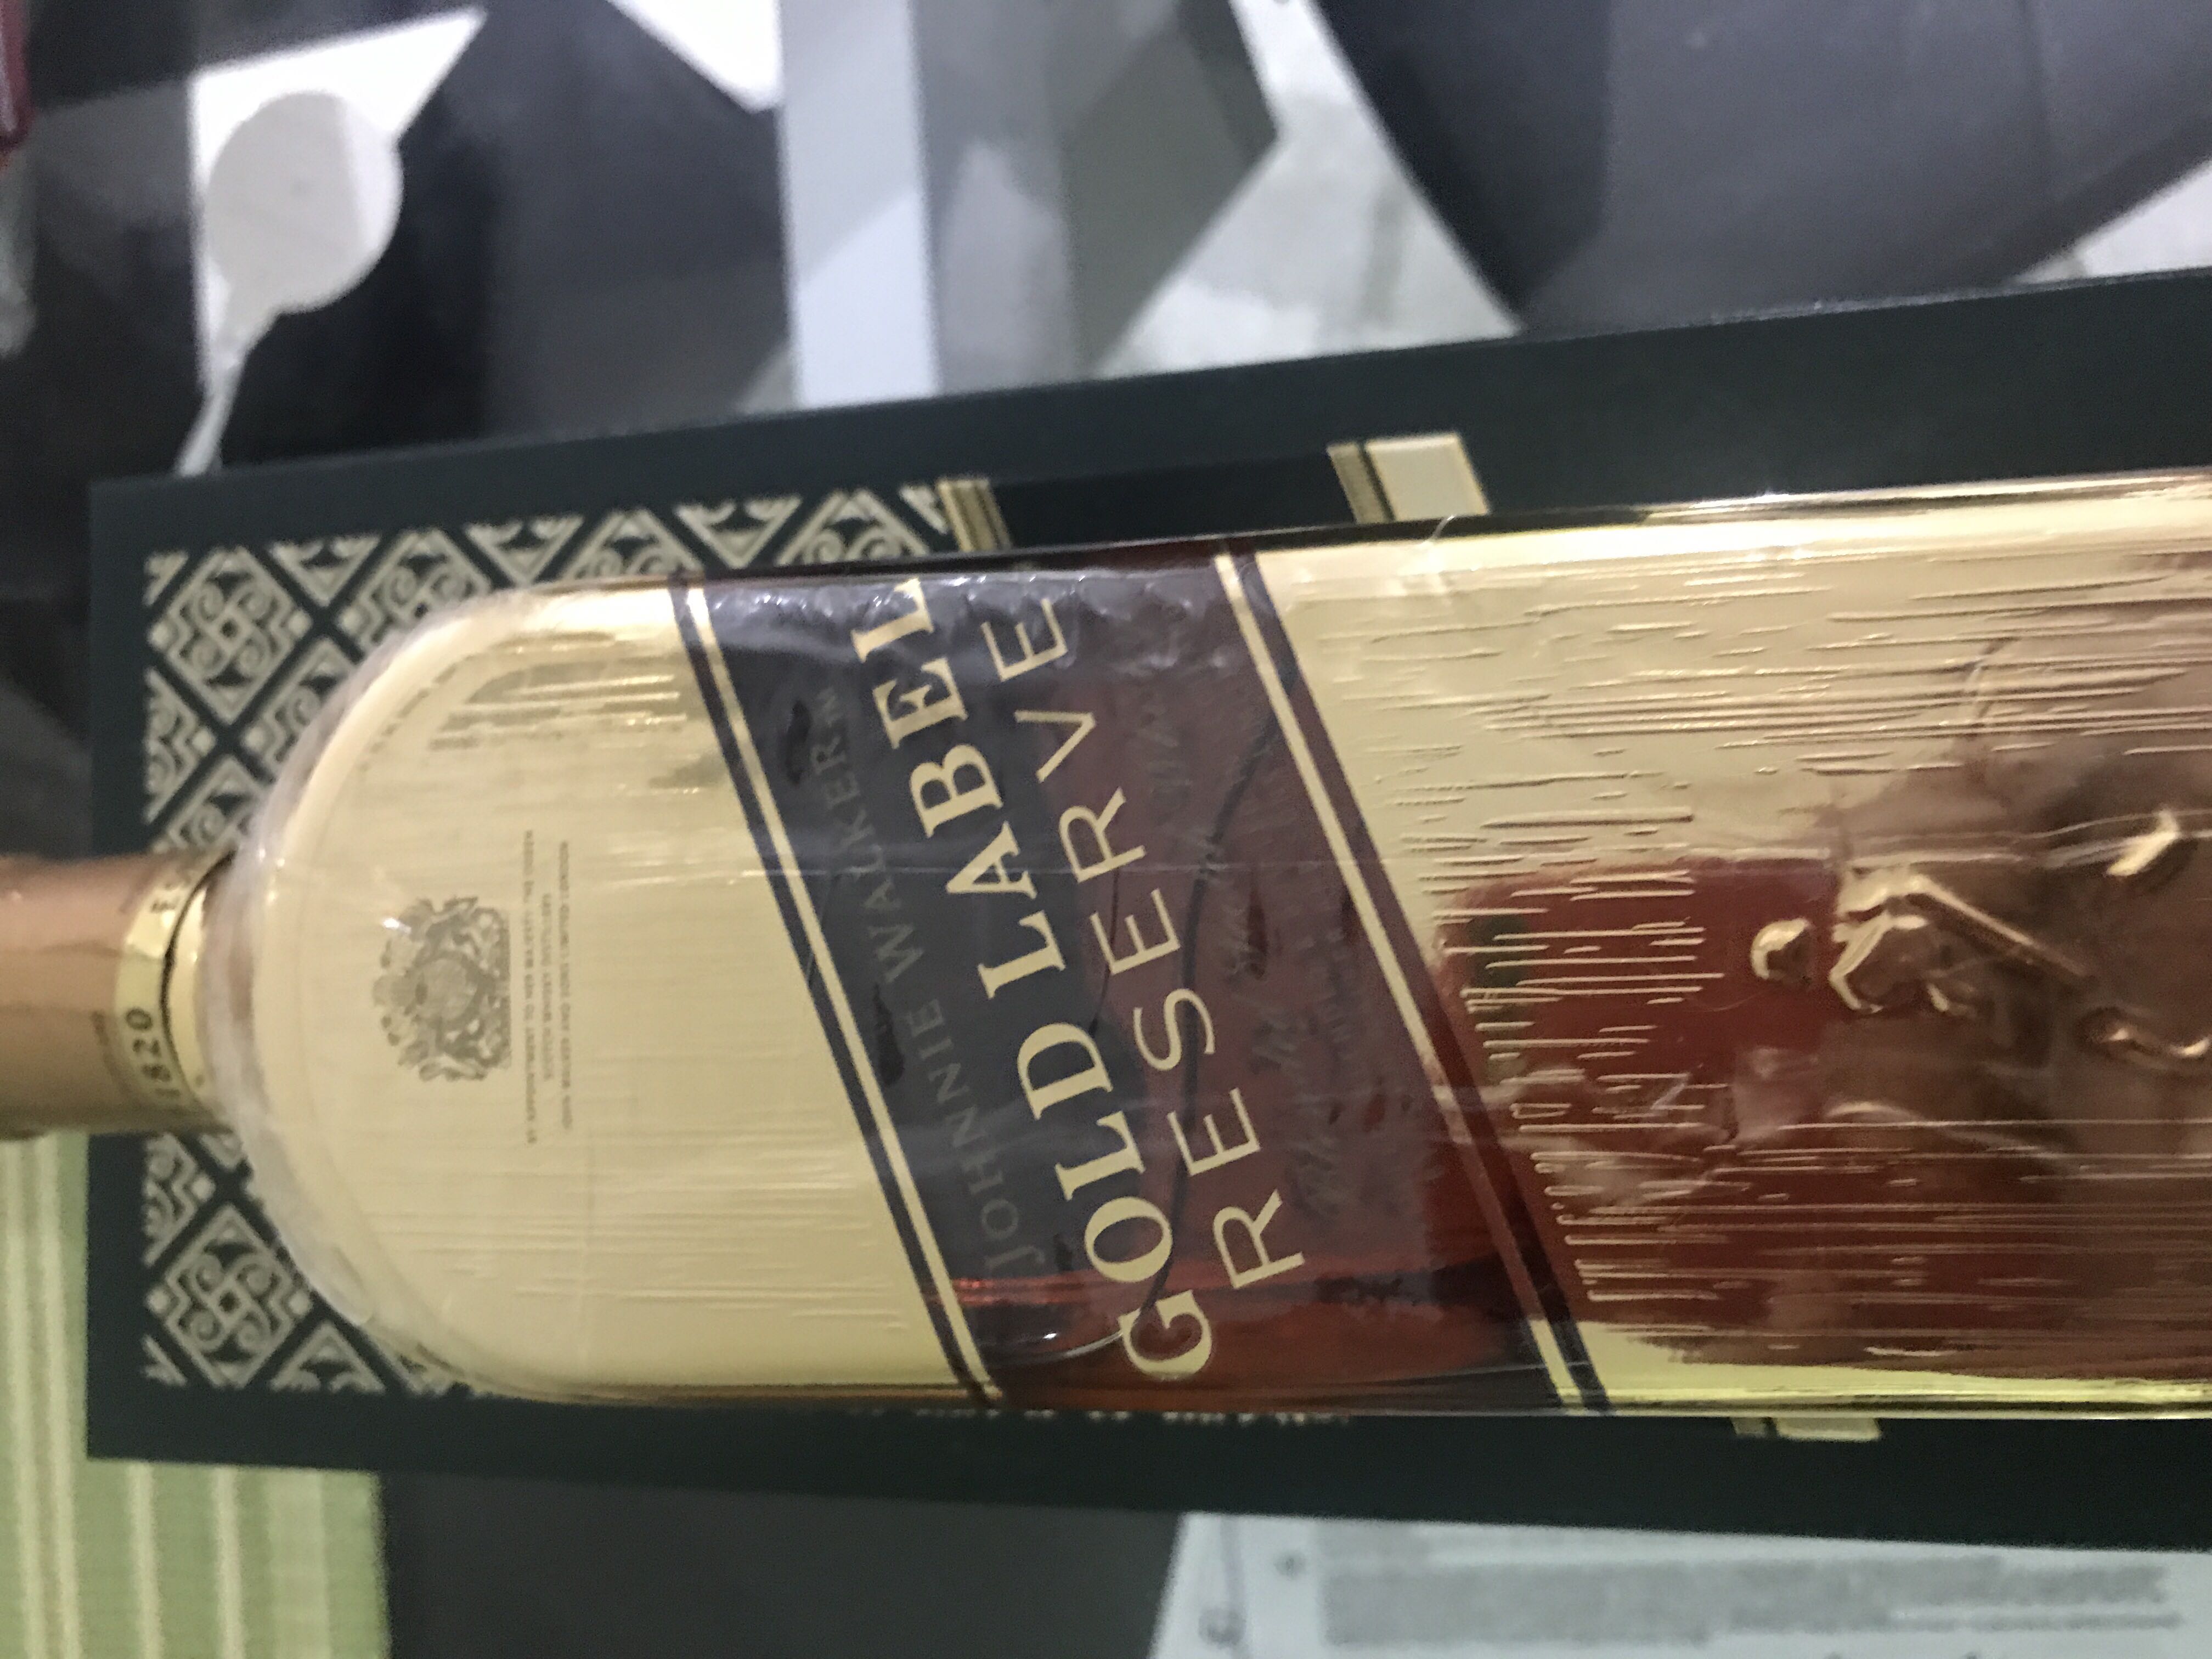 Gold Label Reserve Limited Edition  - Johnnie Walker & Sons (700 mL) alcohol collectible [Barcode 5000267131535] - Main Image 1